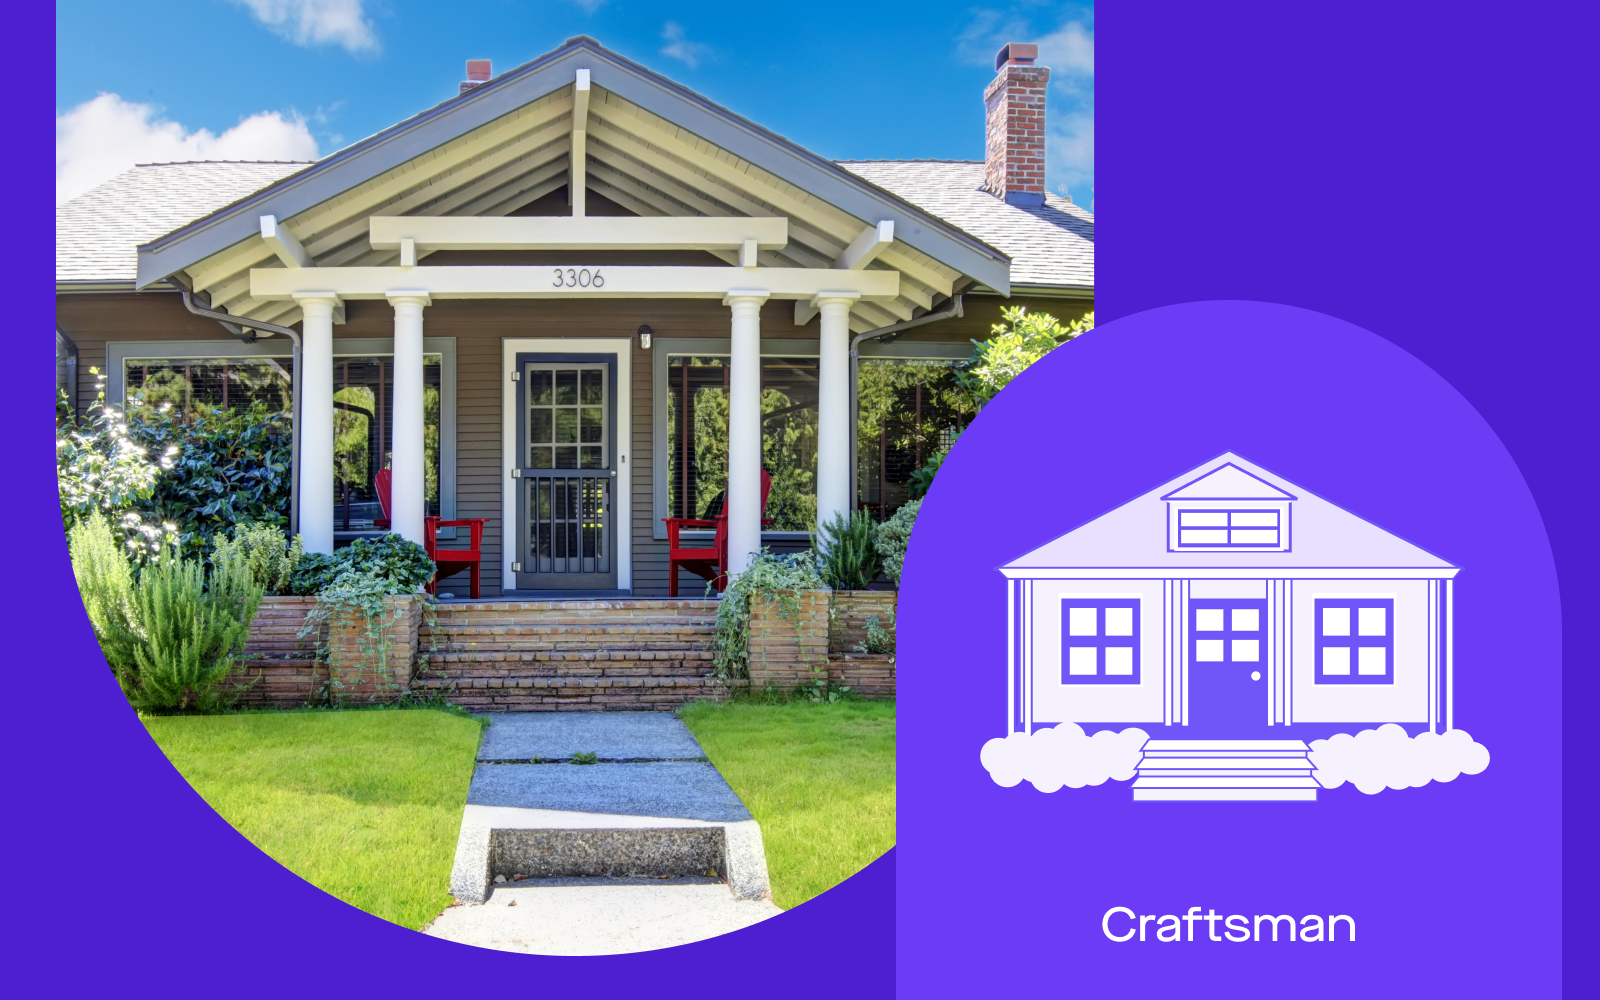 Image of Craftsman style homes in Austin, Texas